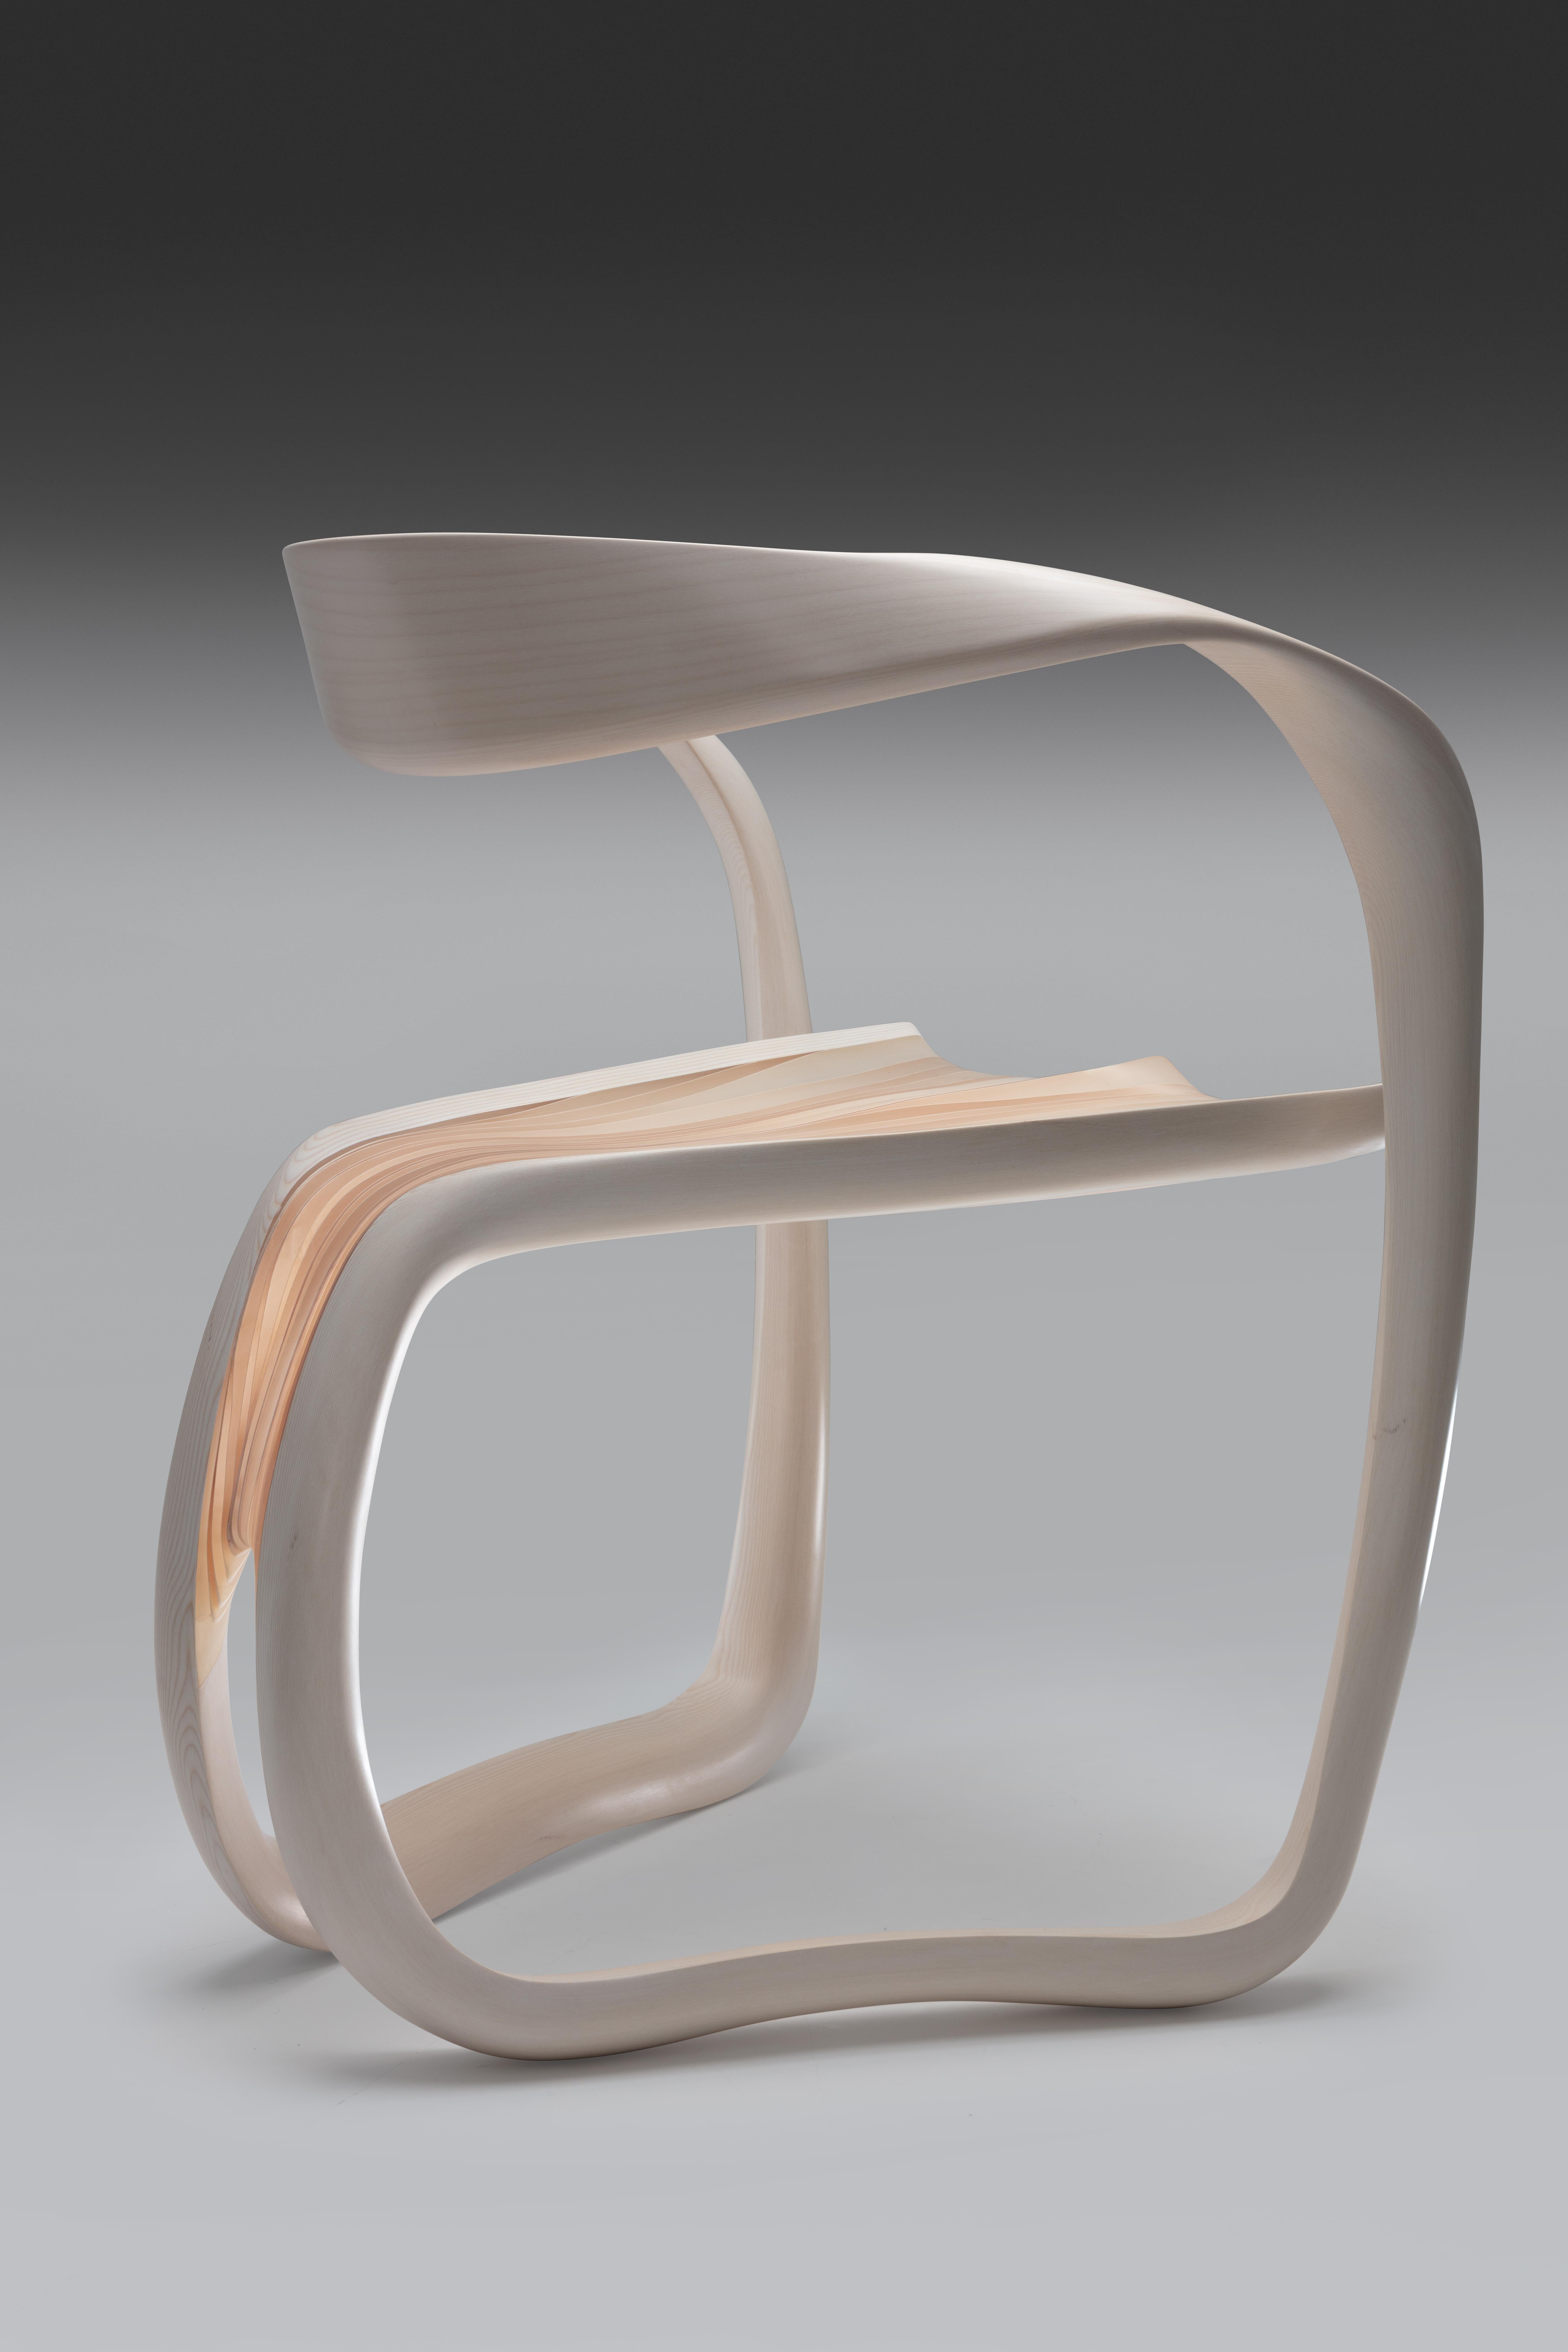 Marc Fish Ethereal Chair Sycamore and Resin Organic Sculptural Design For Sale 1